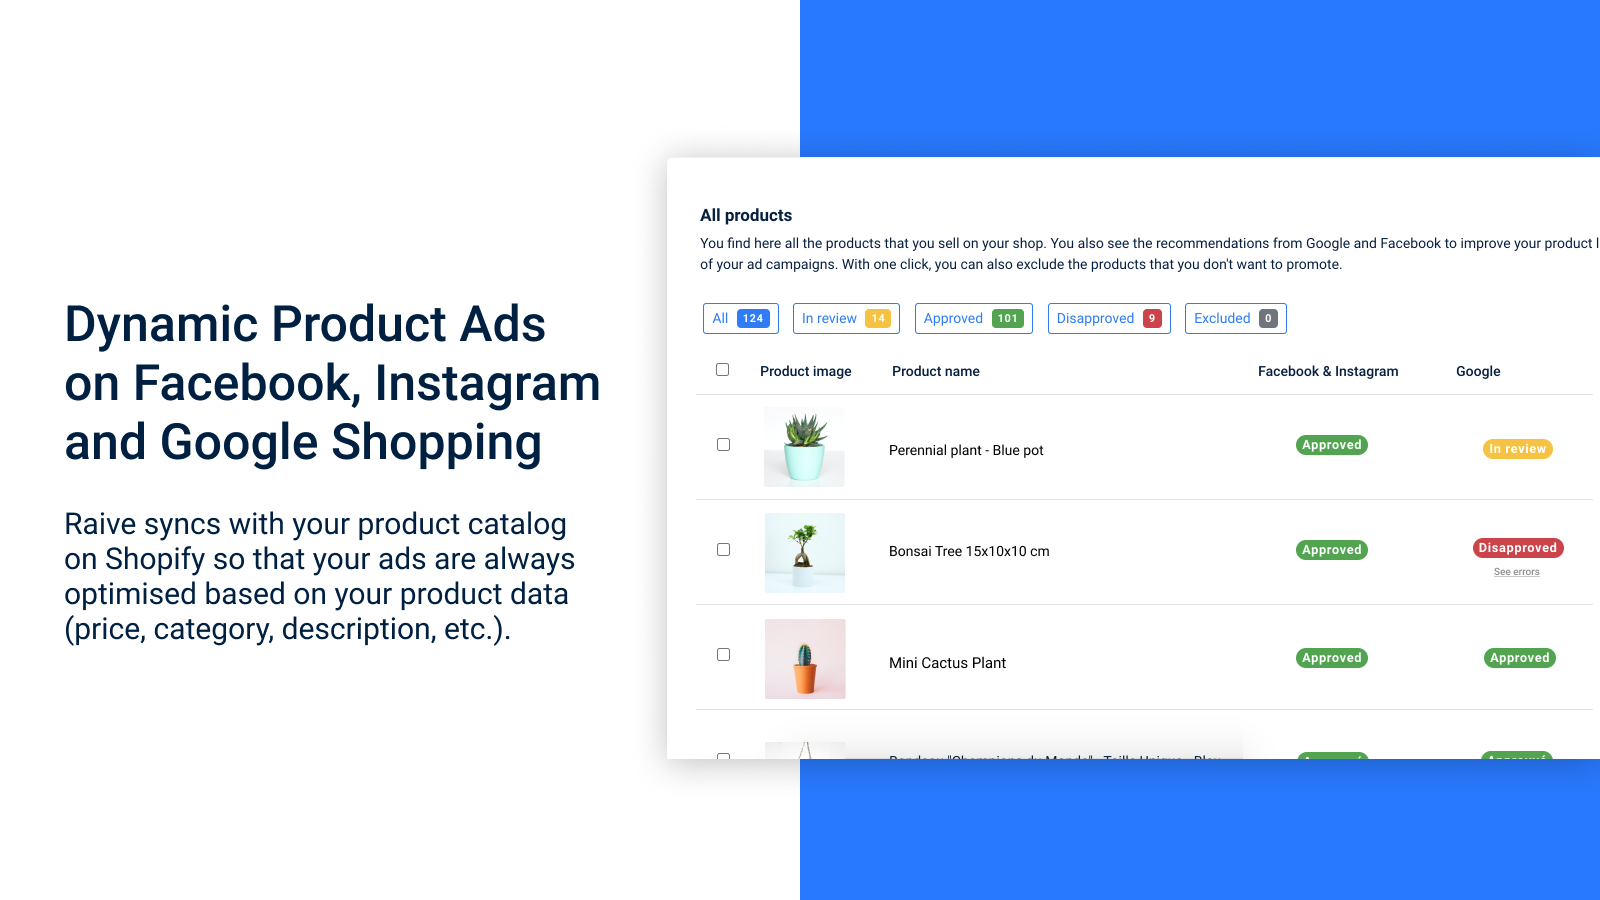 Dynamic Product Ads syncs with your Shopify product catalog to optimize your ads properly